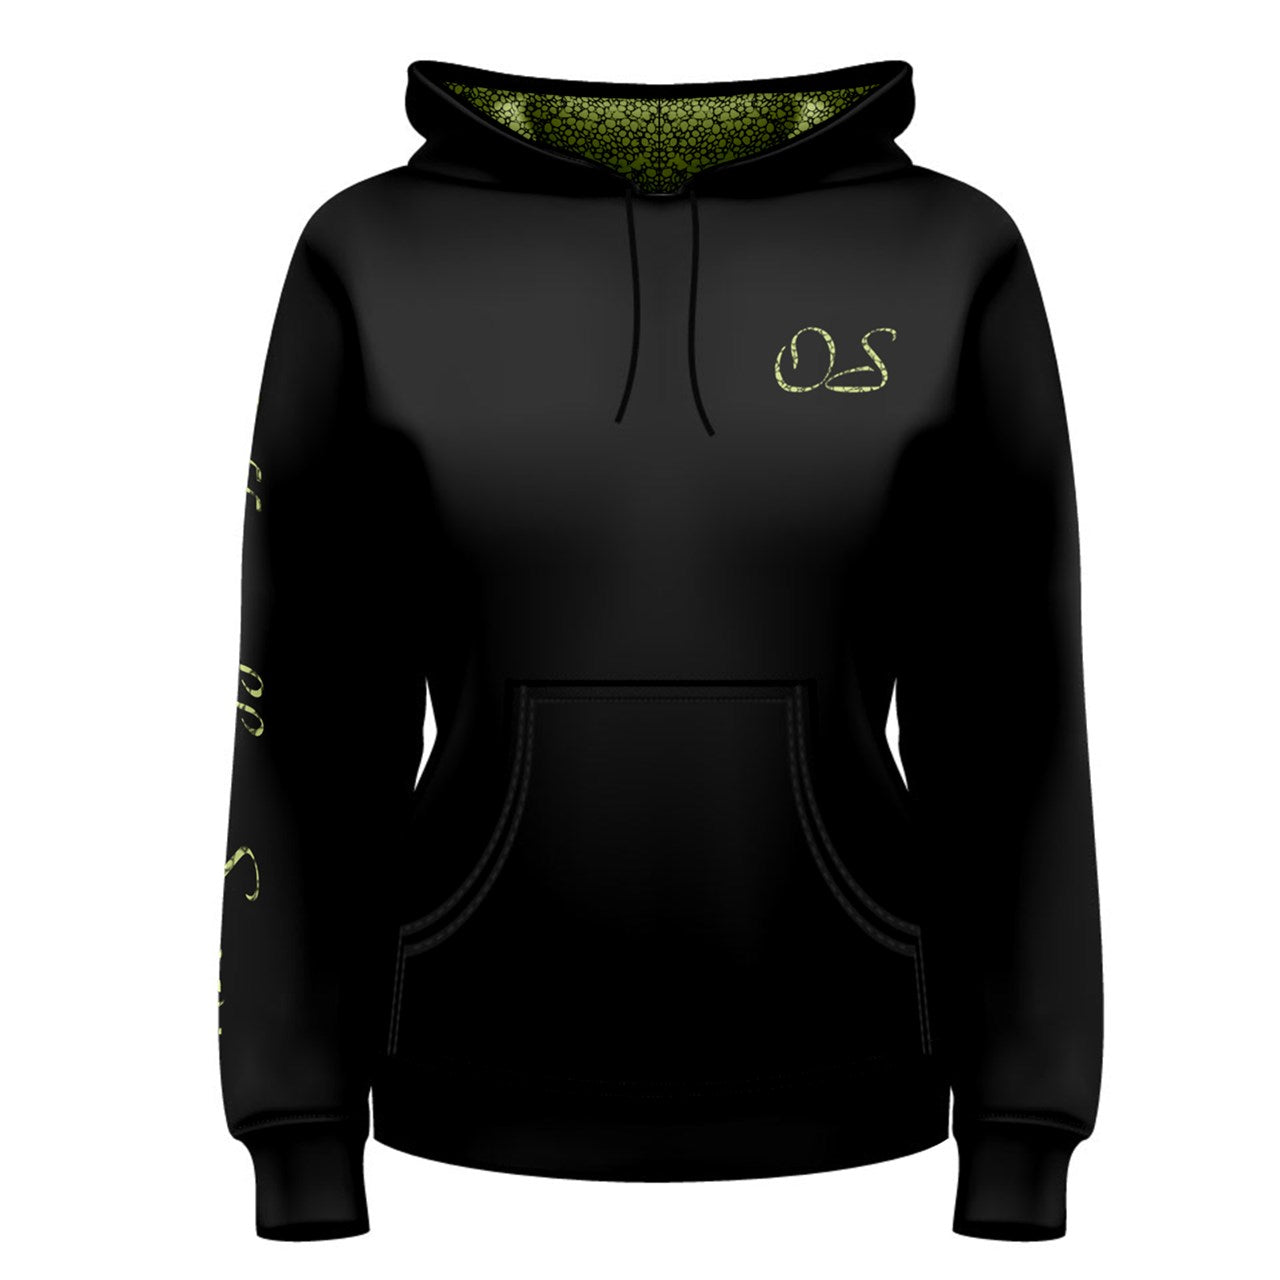 Officially Sexy Neon Green 2 Women's Pullover Hoodie